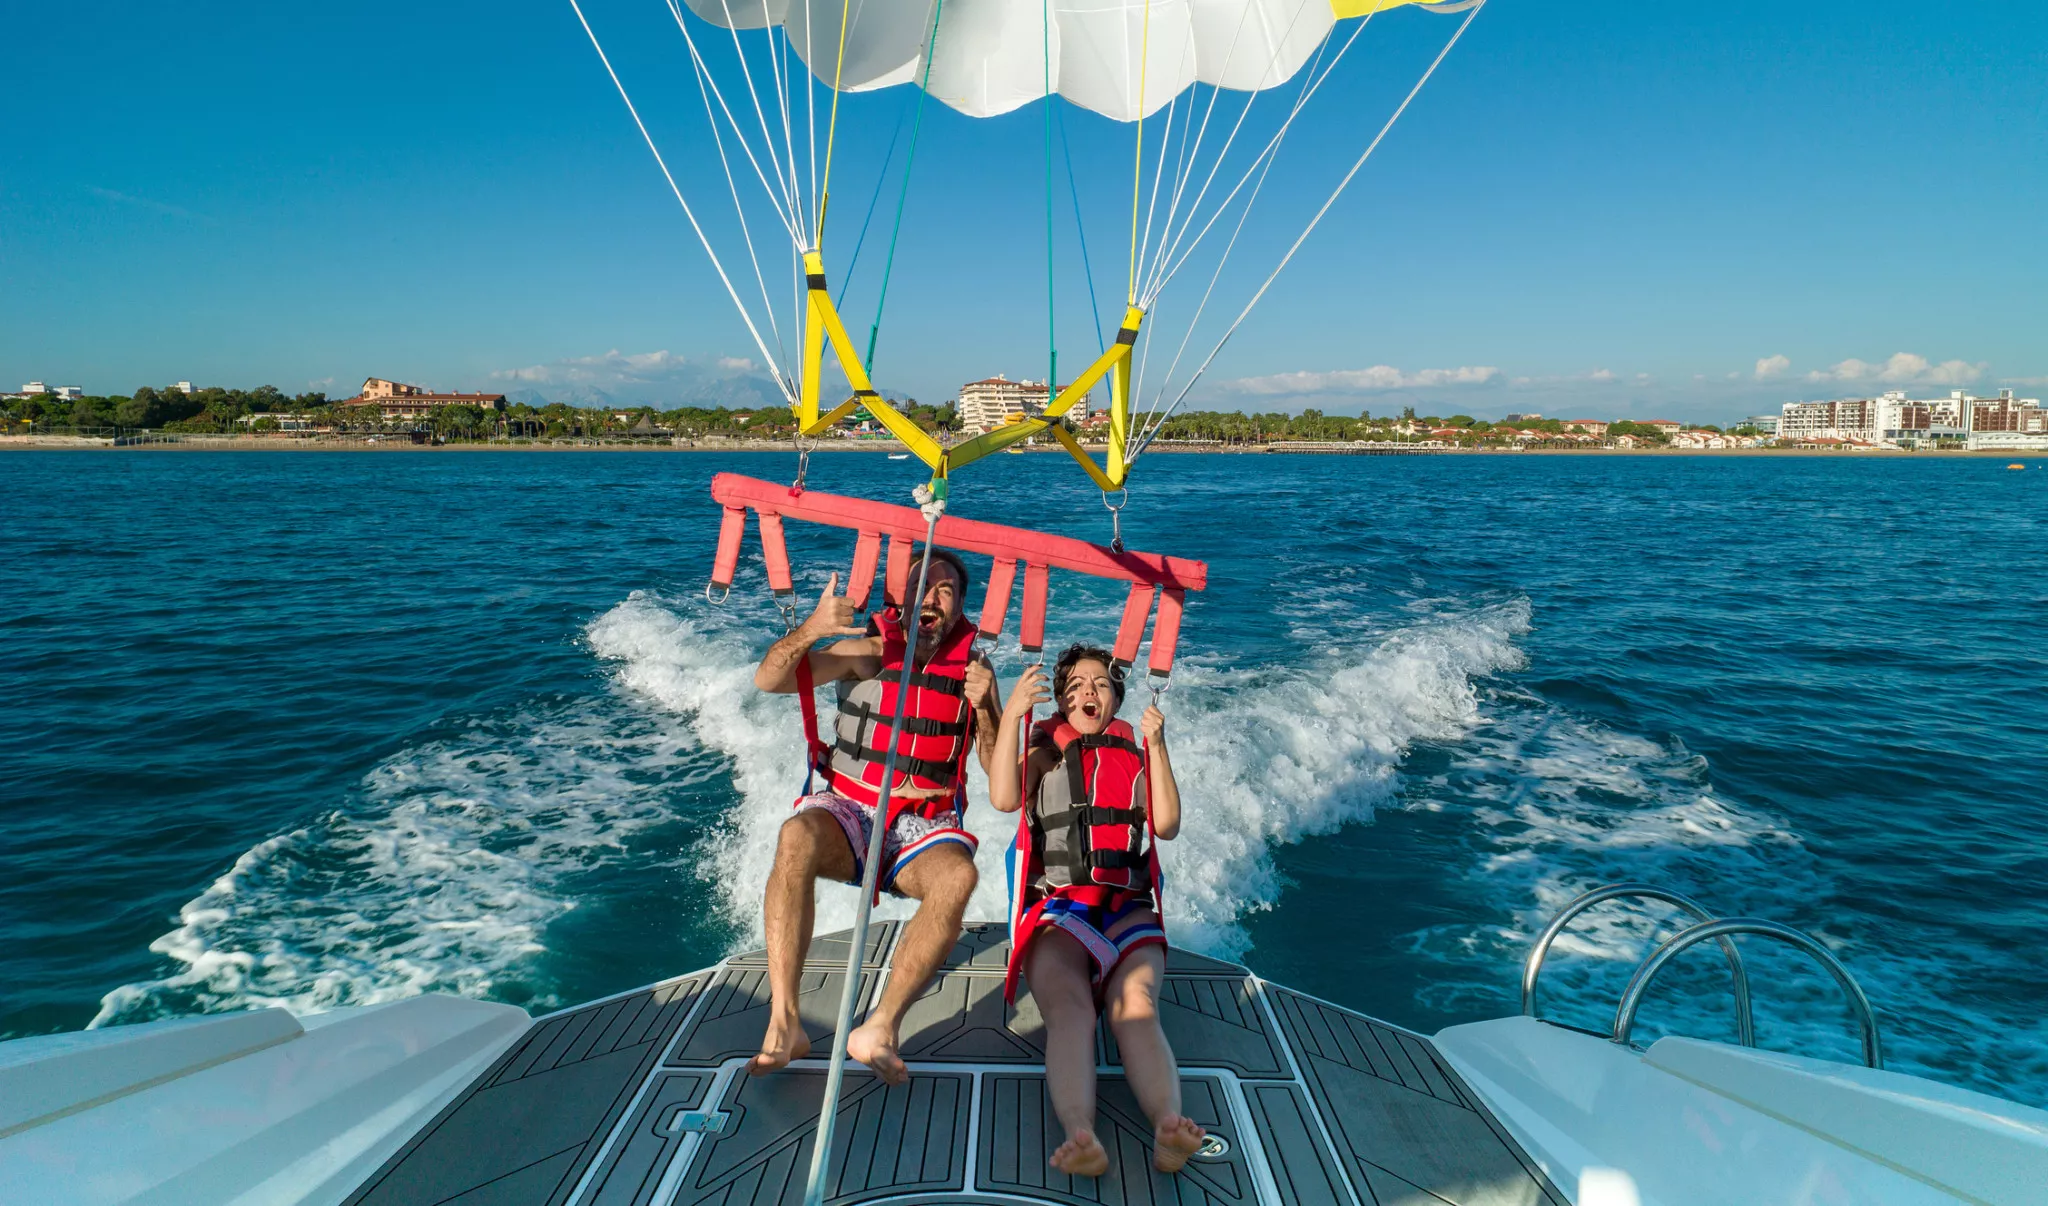 Xtreme Parasail in USA, North America | Parasailing - Rated 4.5